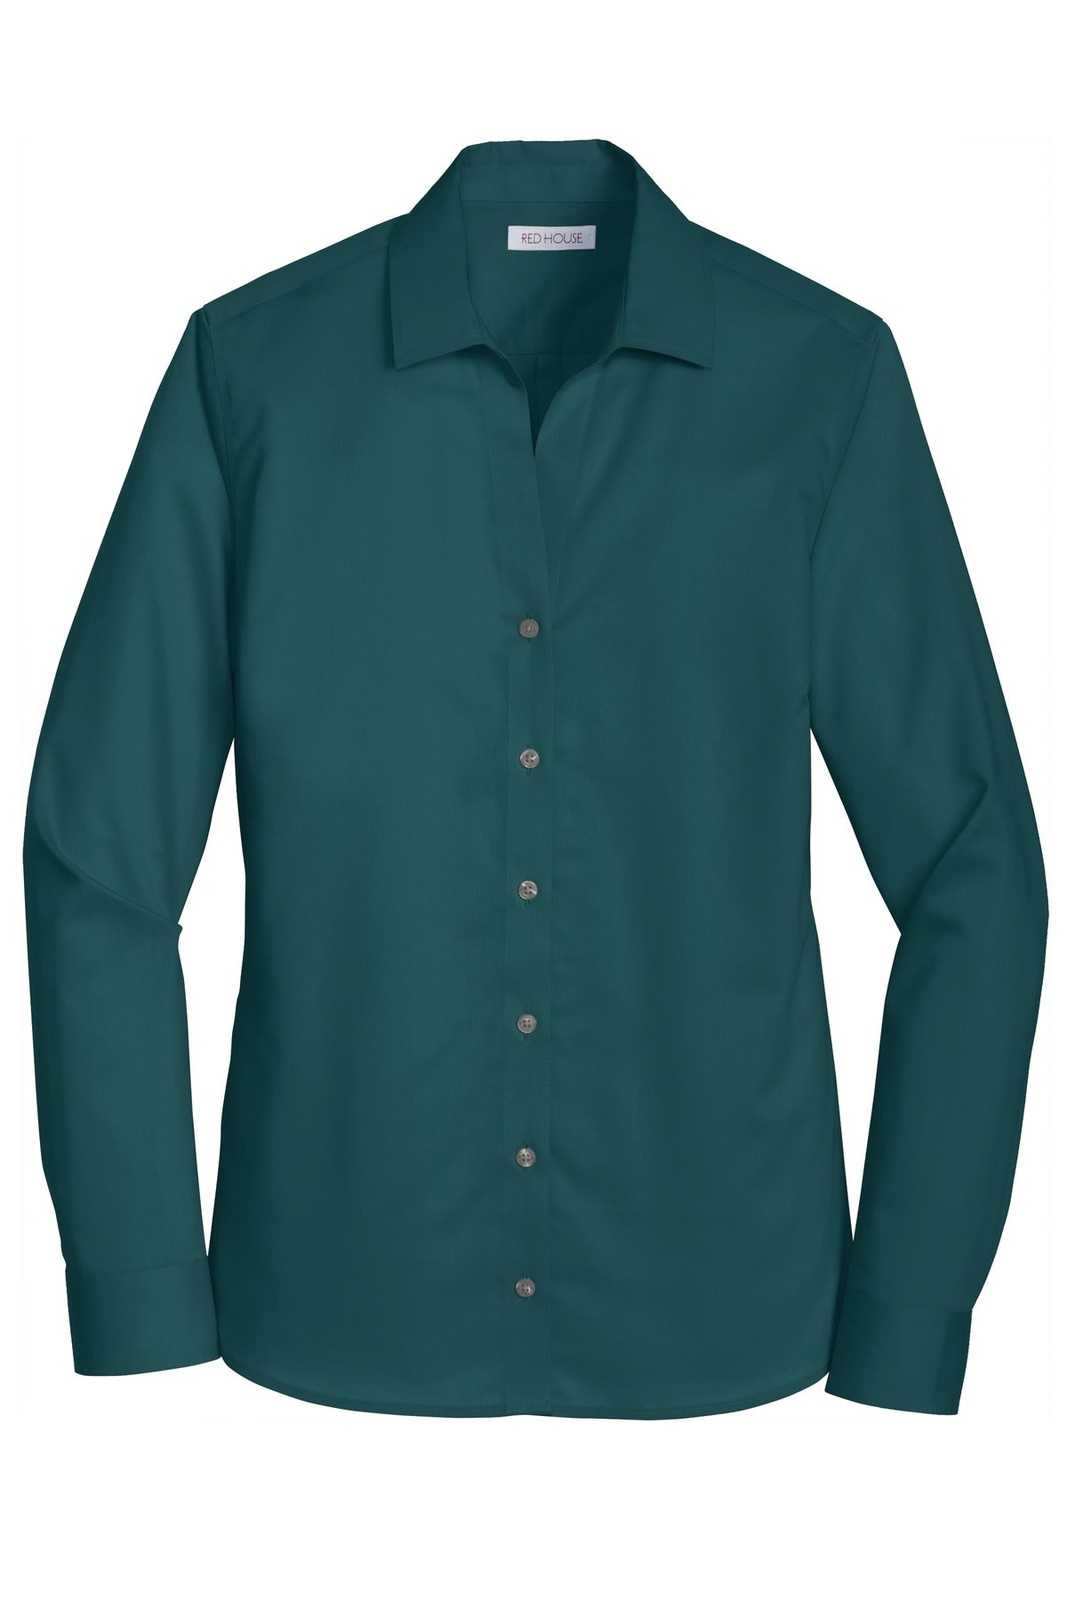 Red House RH79 Ladies Non-Iron Twill Shirt - Bluegrass - HIT a Double - 5